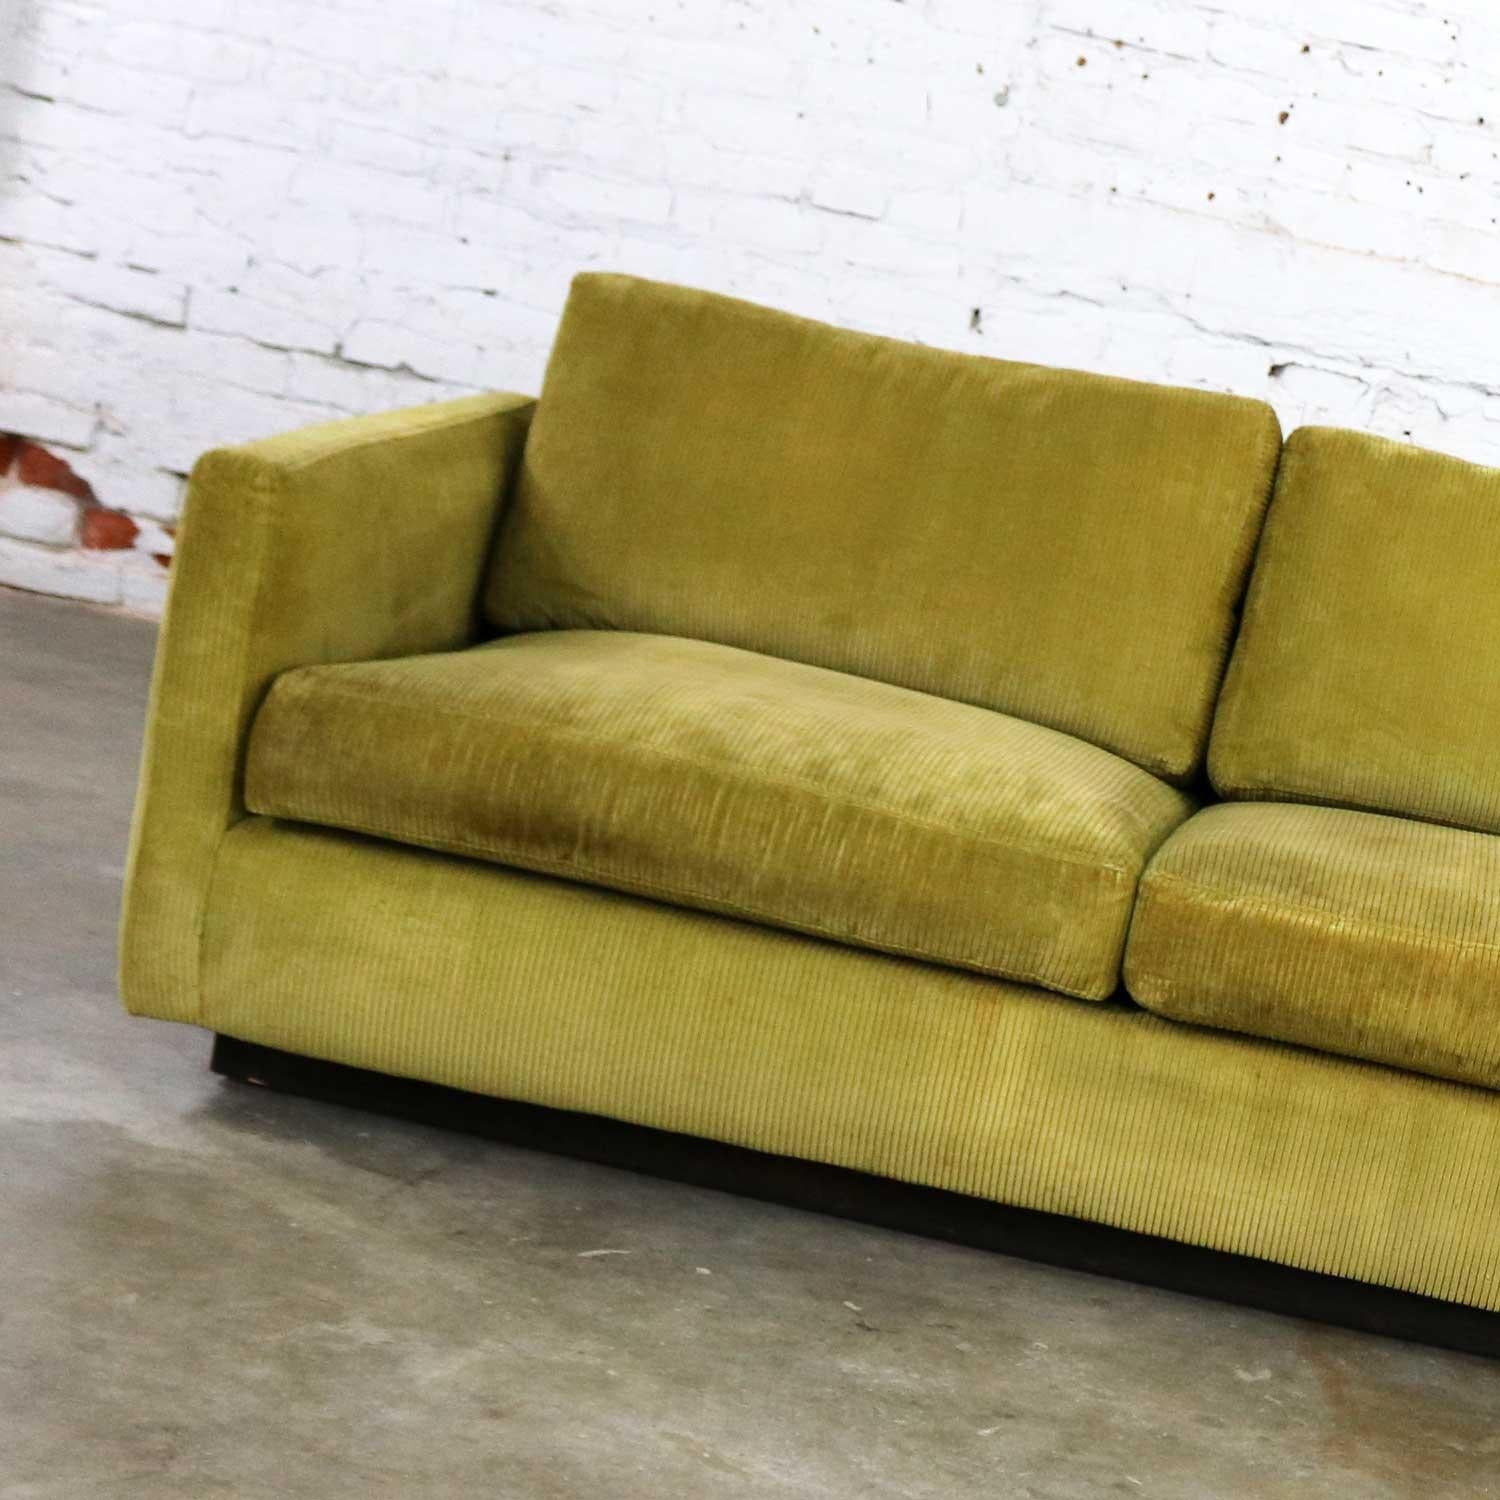 Handsome Lawson style sofa in its original olive colored wide wale corduroy fabric by Milo Baughman for Thayer Coggin. This sofa is unmarked, but we do have the original sales invoice from when it was purchased in 1966. It is in wonderful original